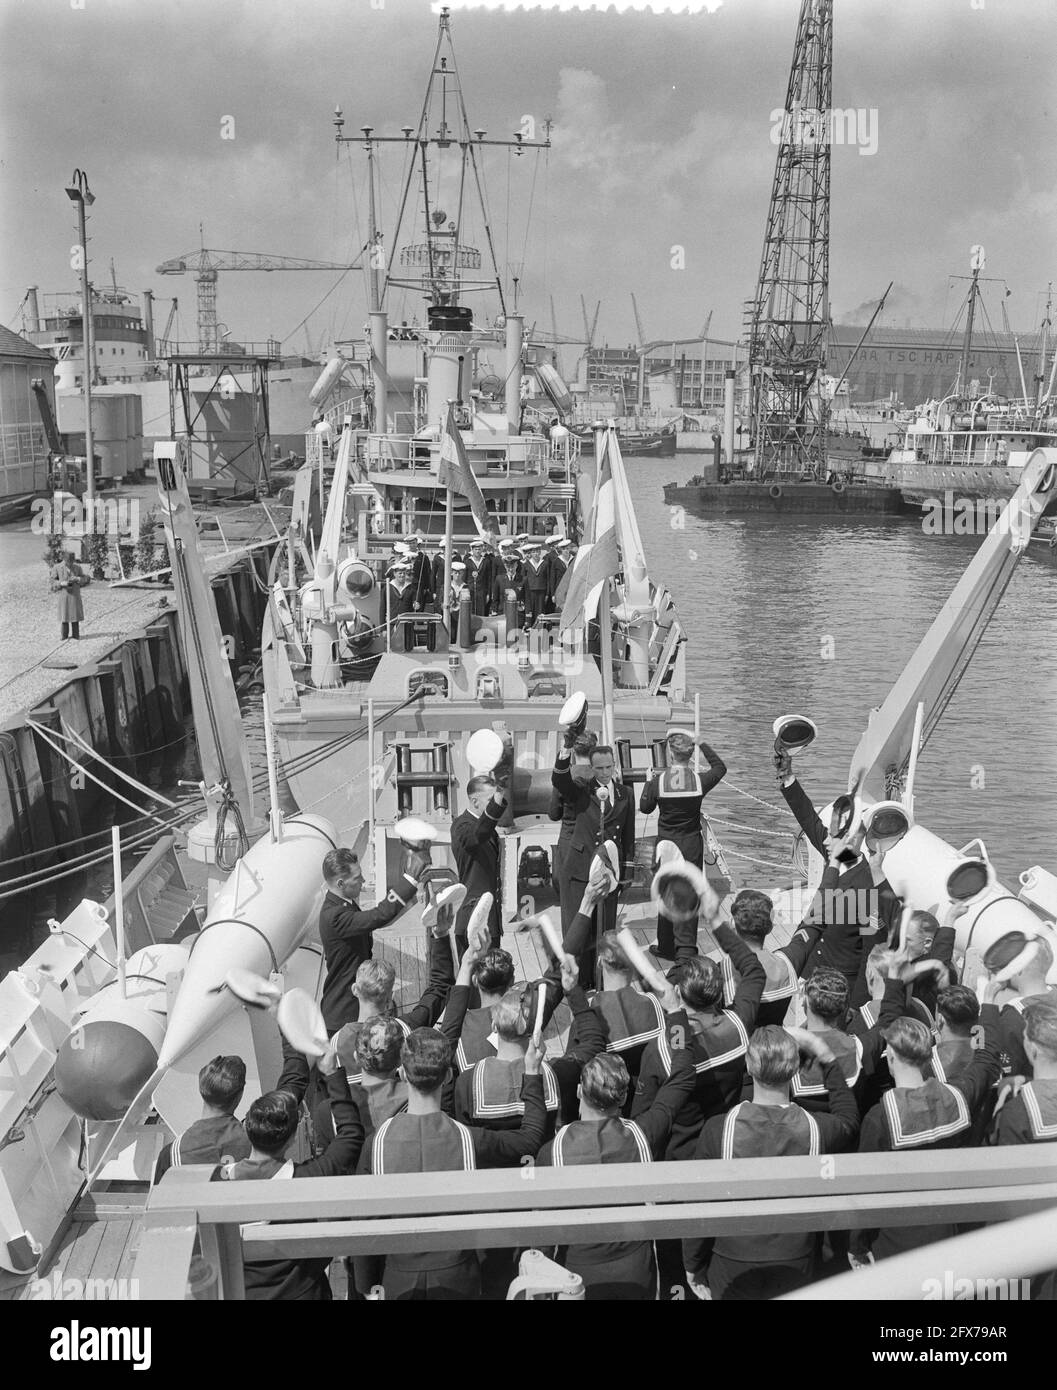 Commissioning of minesweepers Abcoude and Naarden Werf Gusto Schiedam, May 18, 1956, Commissioning, MINEENVEGERS, The Netherlands, 20th century press agency photo, news to remember, documentary, historic photography 1945-1990, visual stories, human history of the Twentieth Century, capturing moments in time Stock Photo